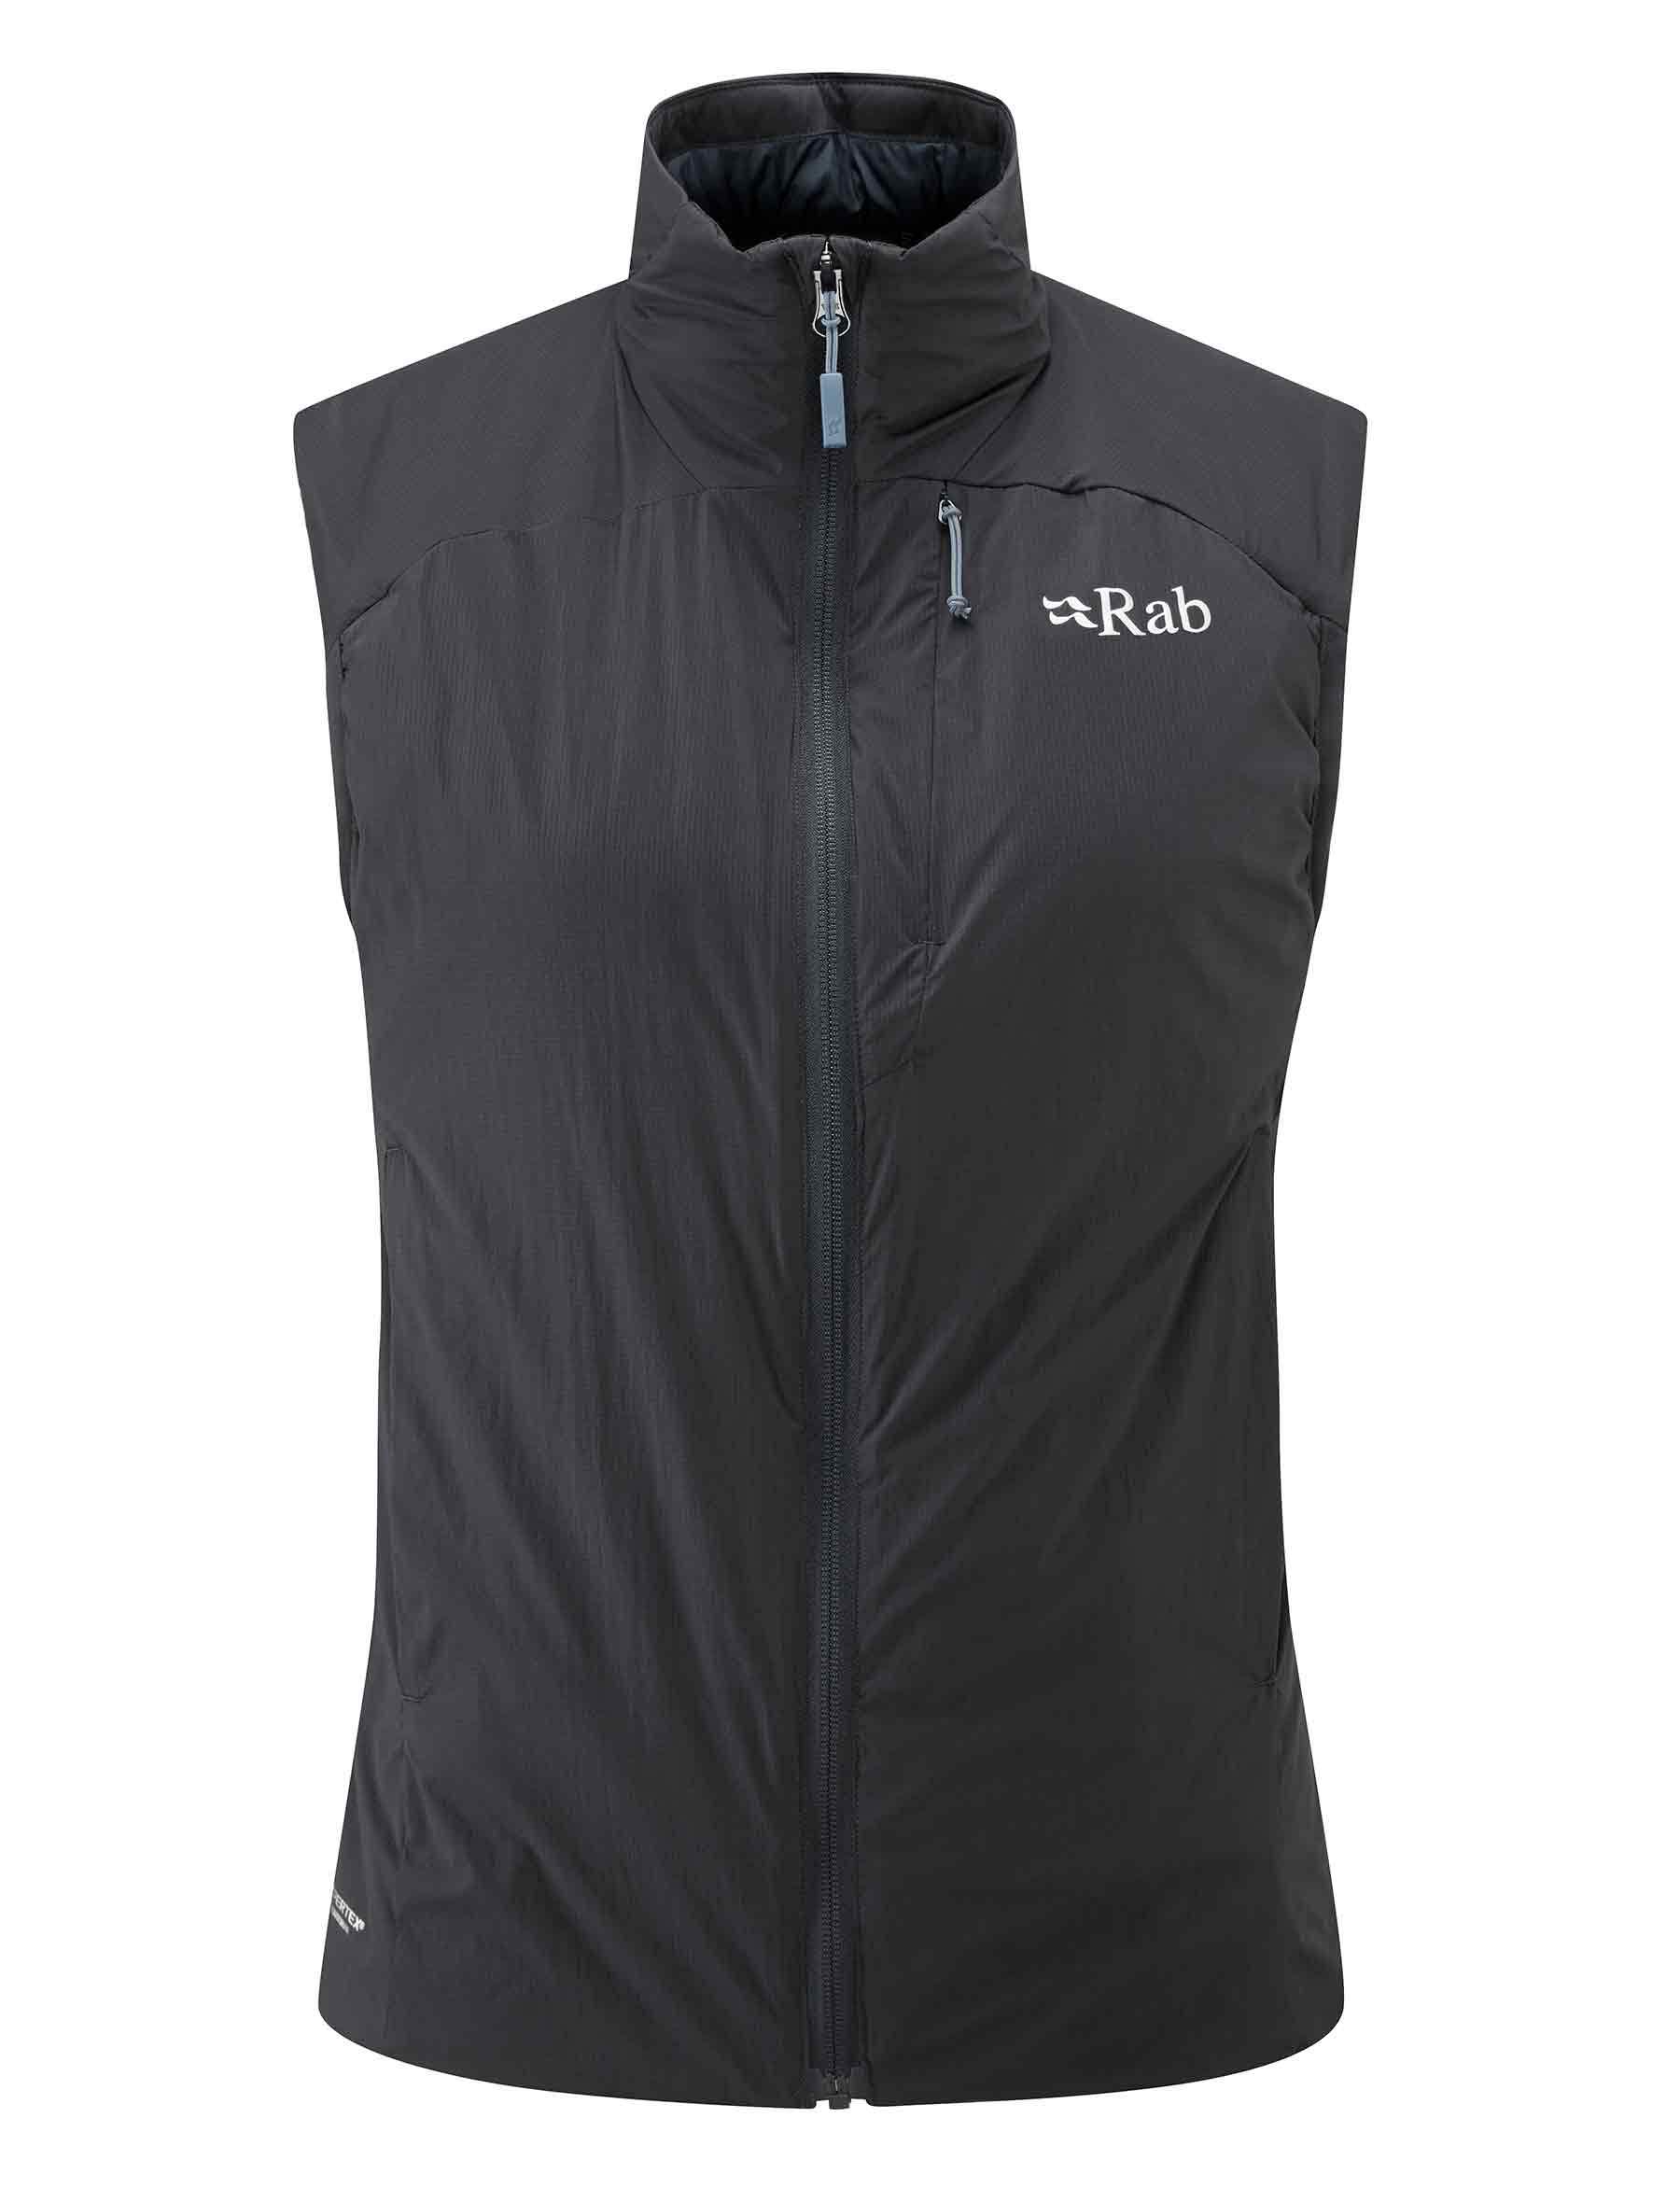 Women’s Xenair Vest by RAB - The Luxury Promotional Gifts Company Limited